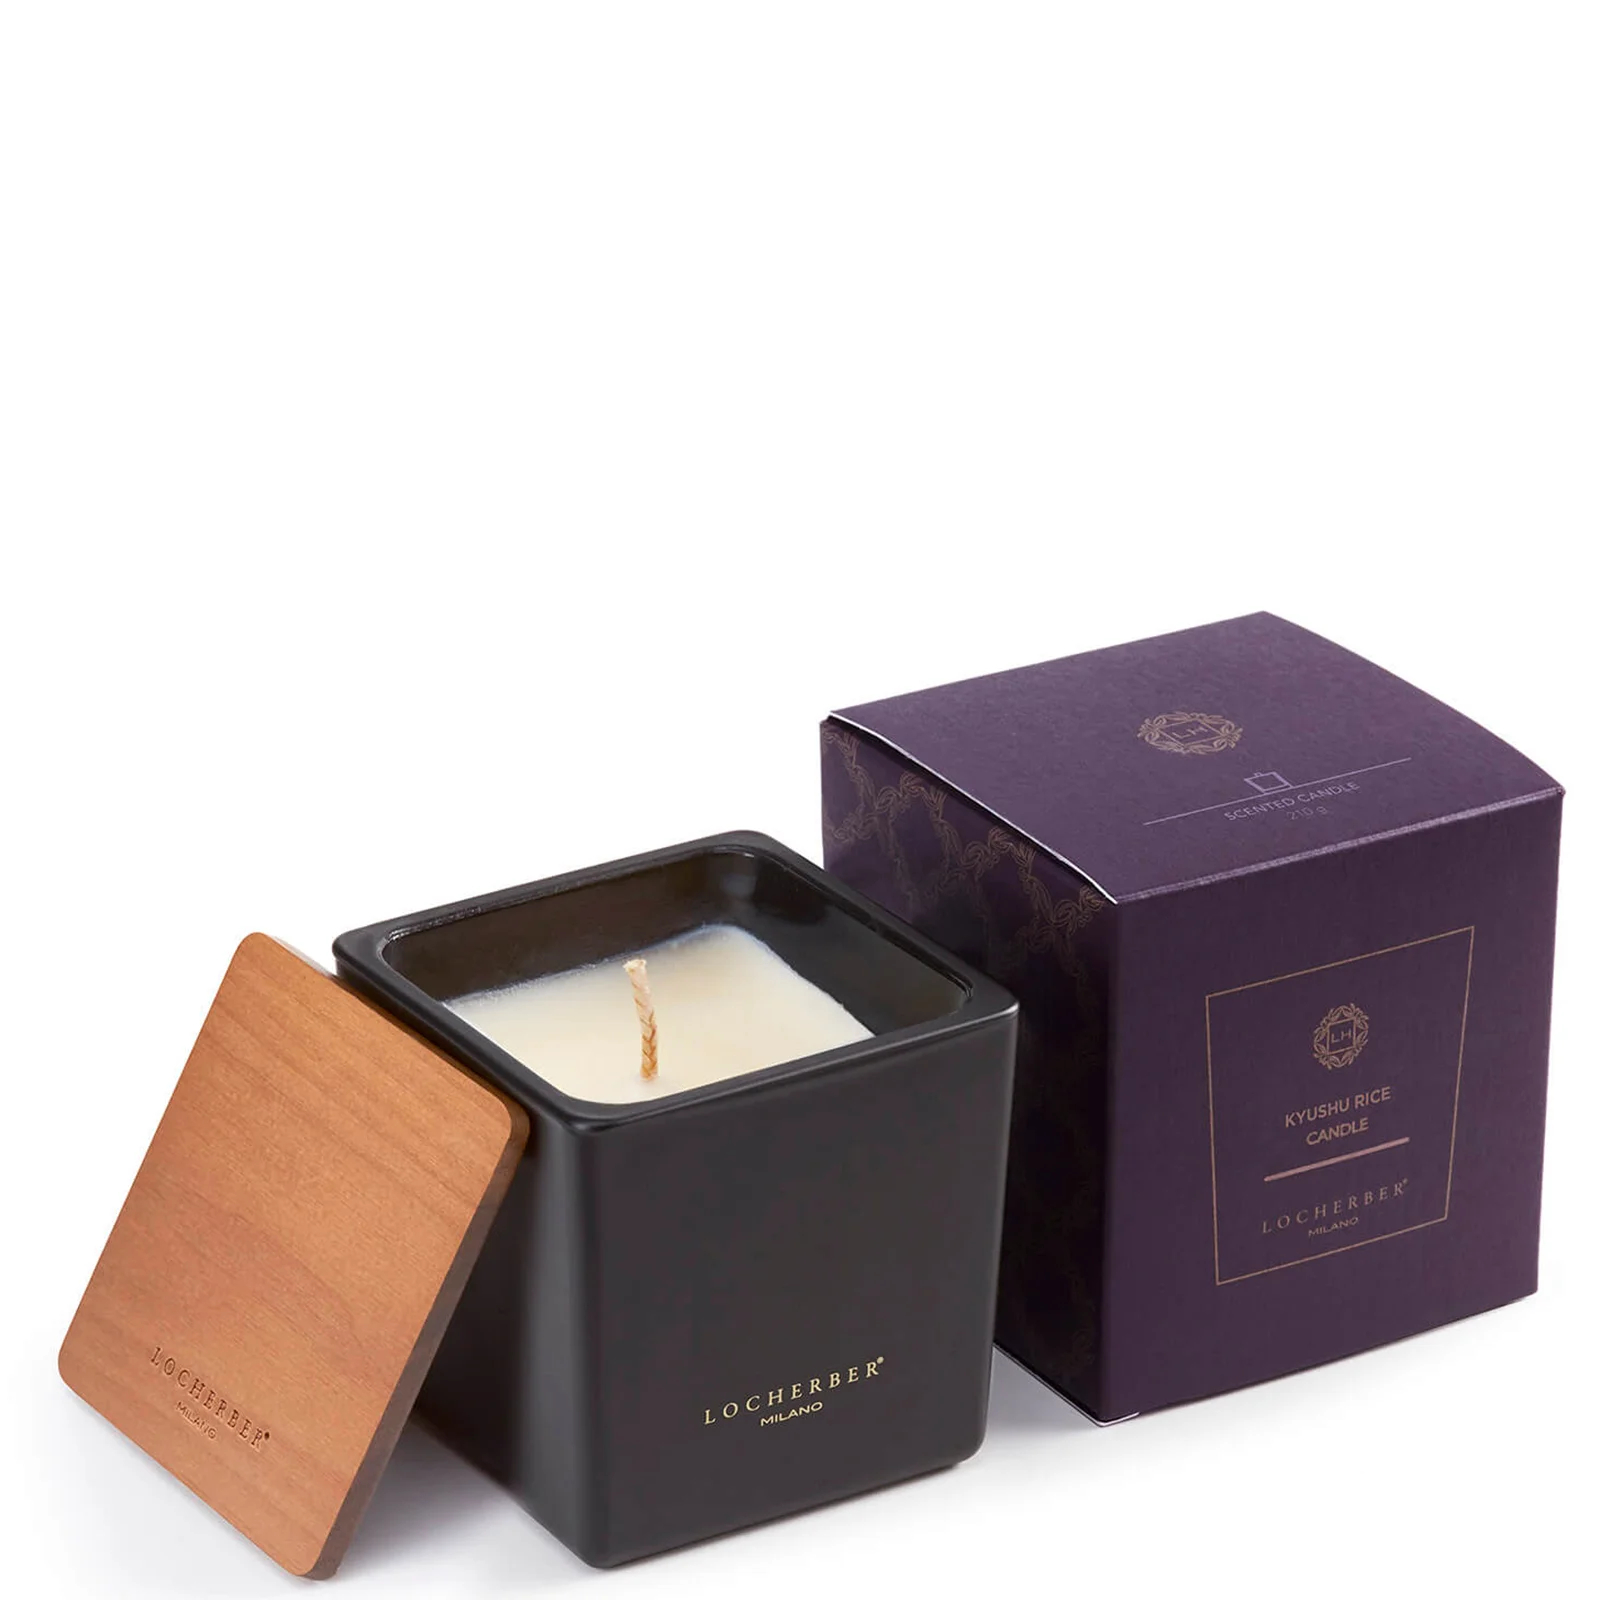 Locherber Kyushu Rice Scented Candle - 210g Image 1